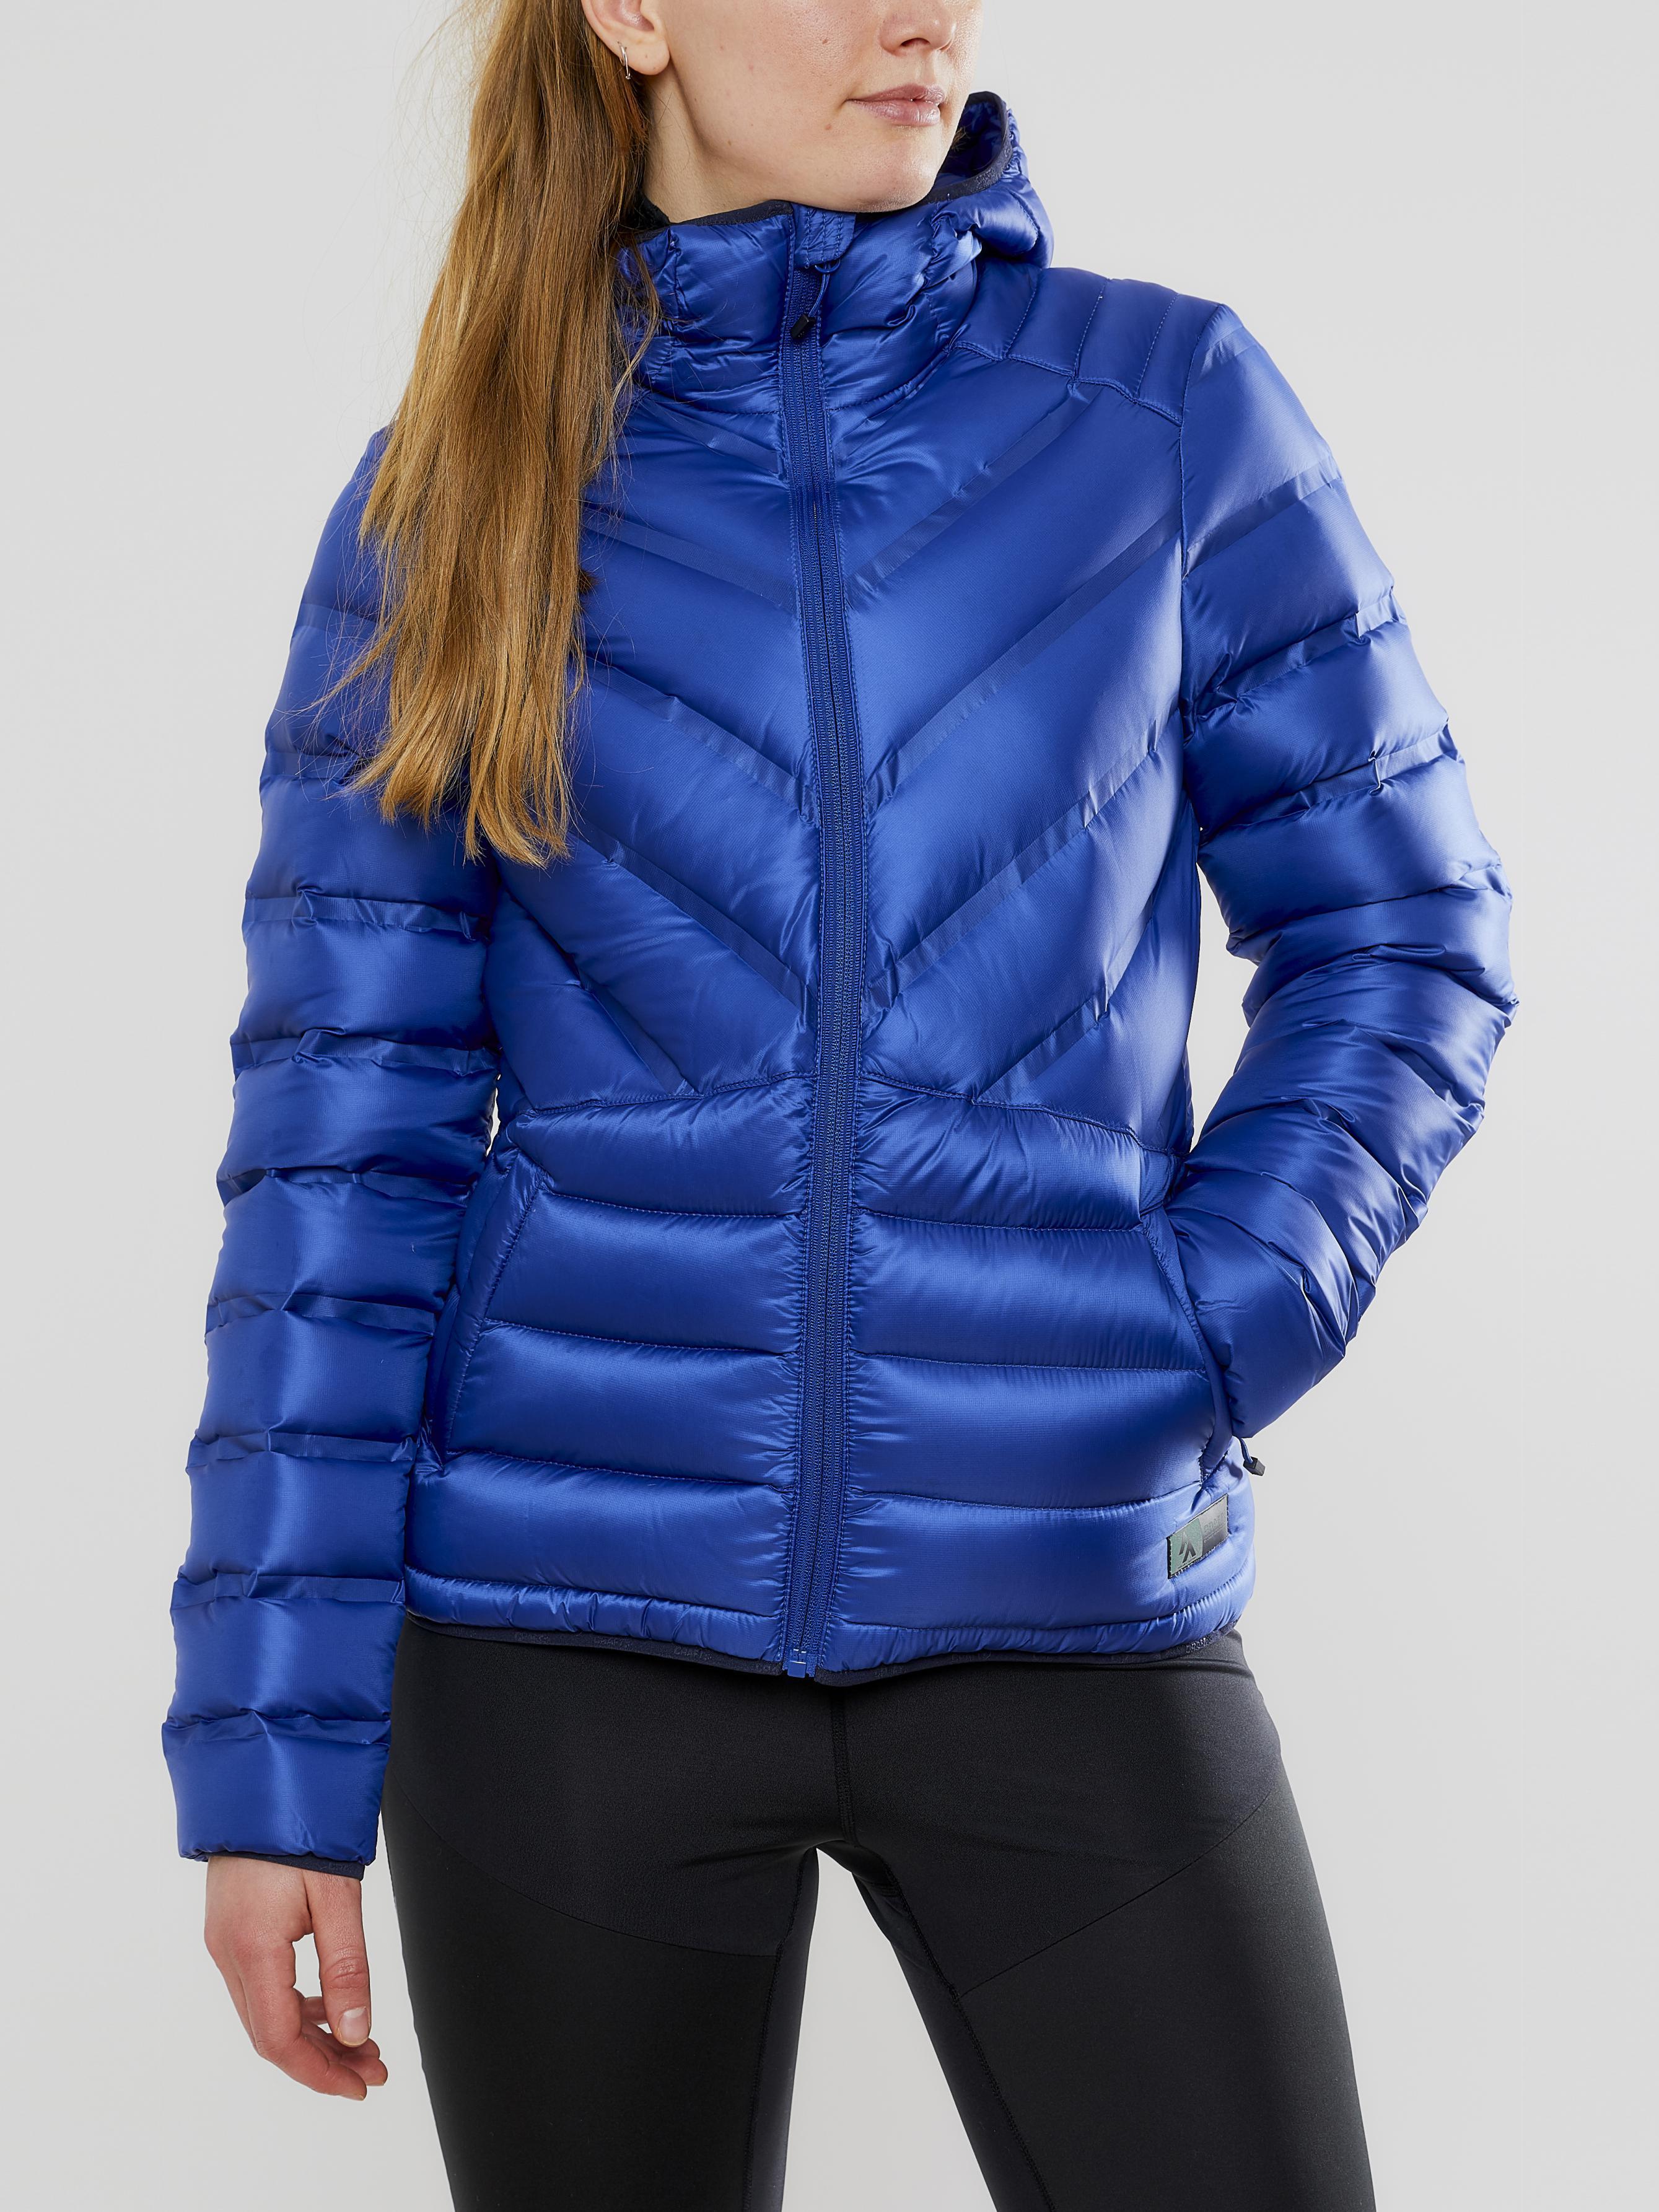 Buy Another Choice Winter Down Puffer Jacket for Women, Hooded Women Winter Down  Jacket Puffer Coat with Thumb Holes, White, Small at Amazon.in